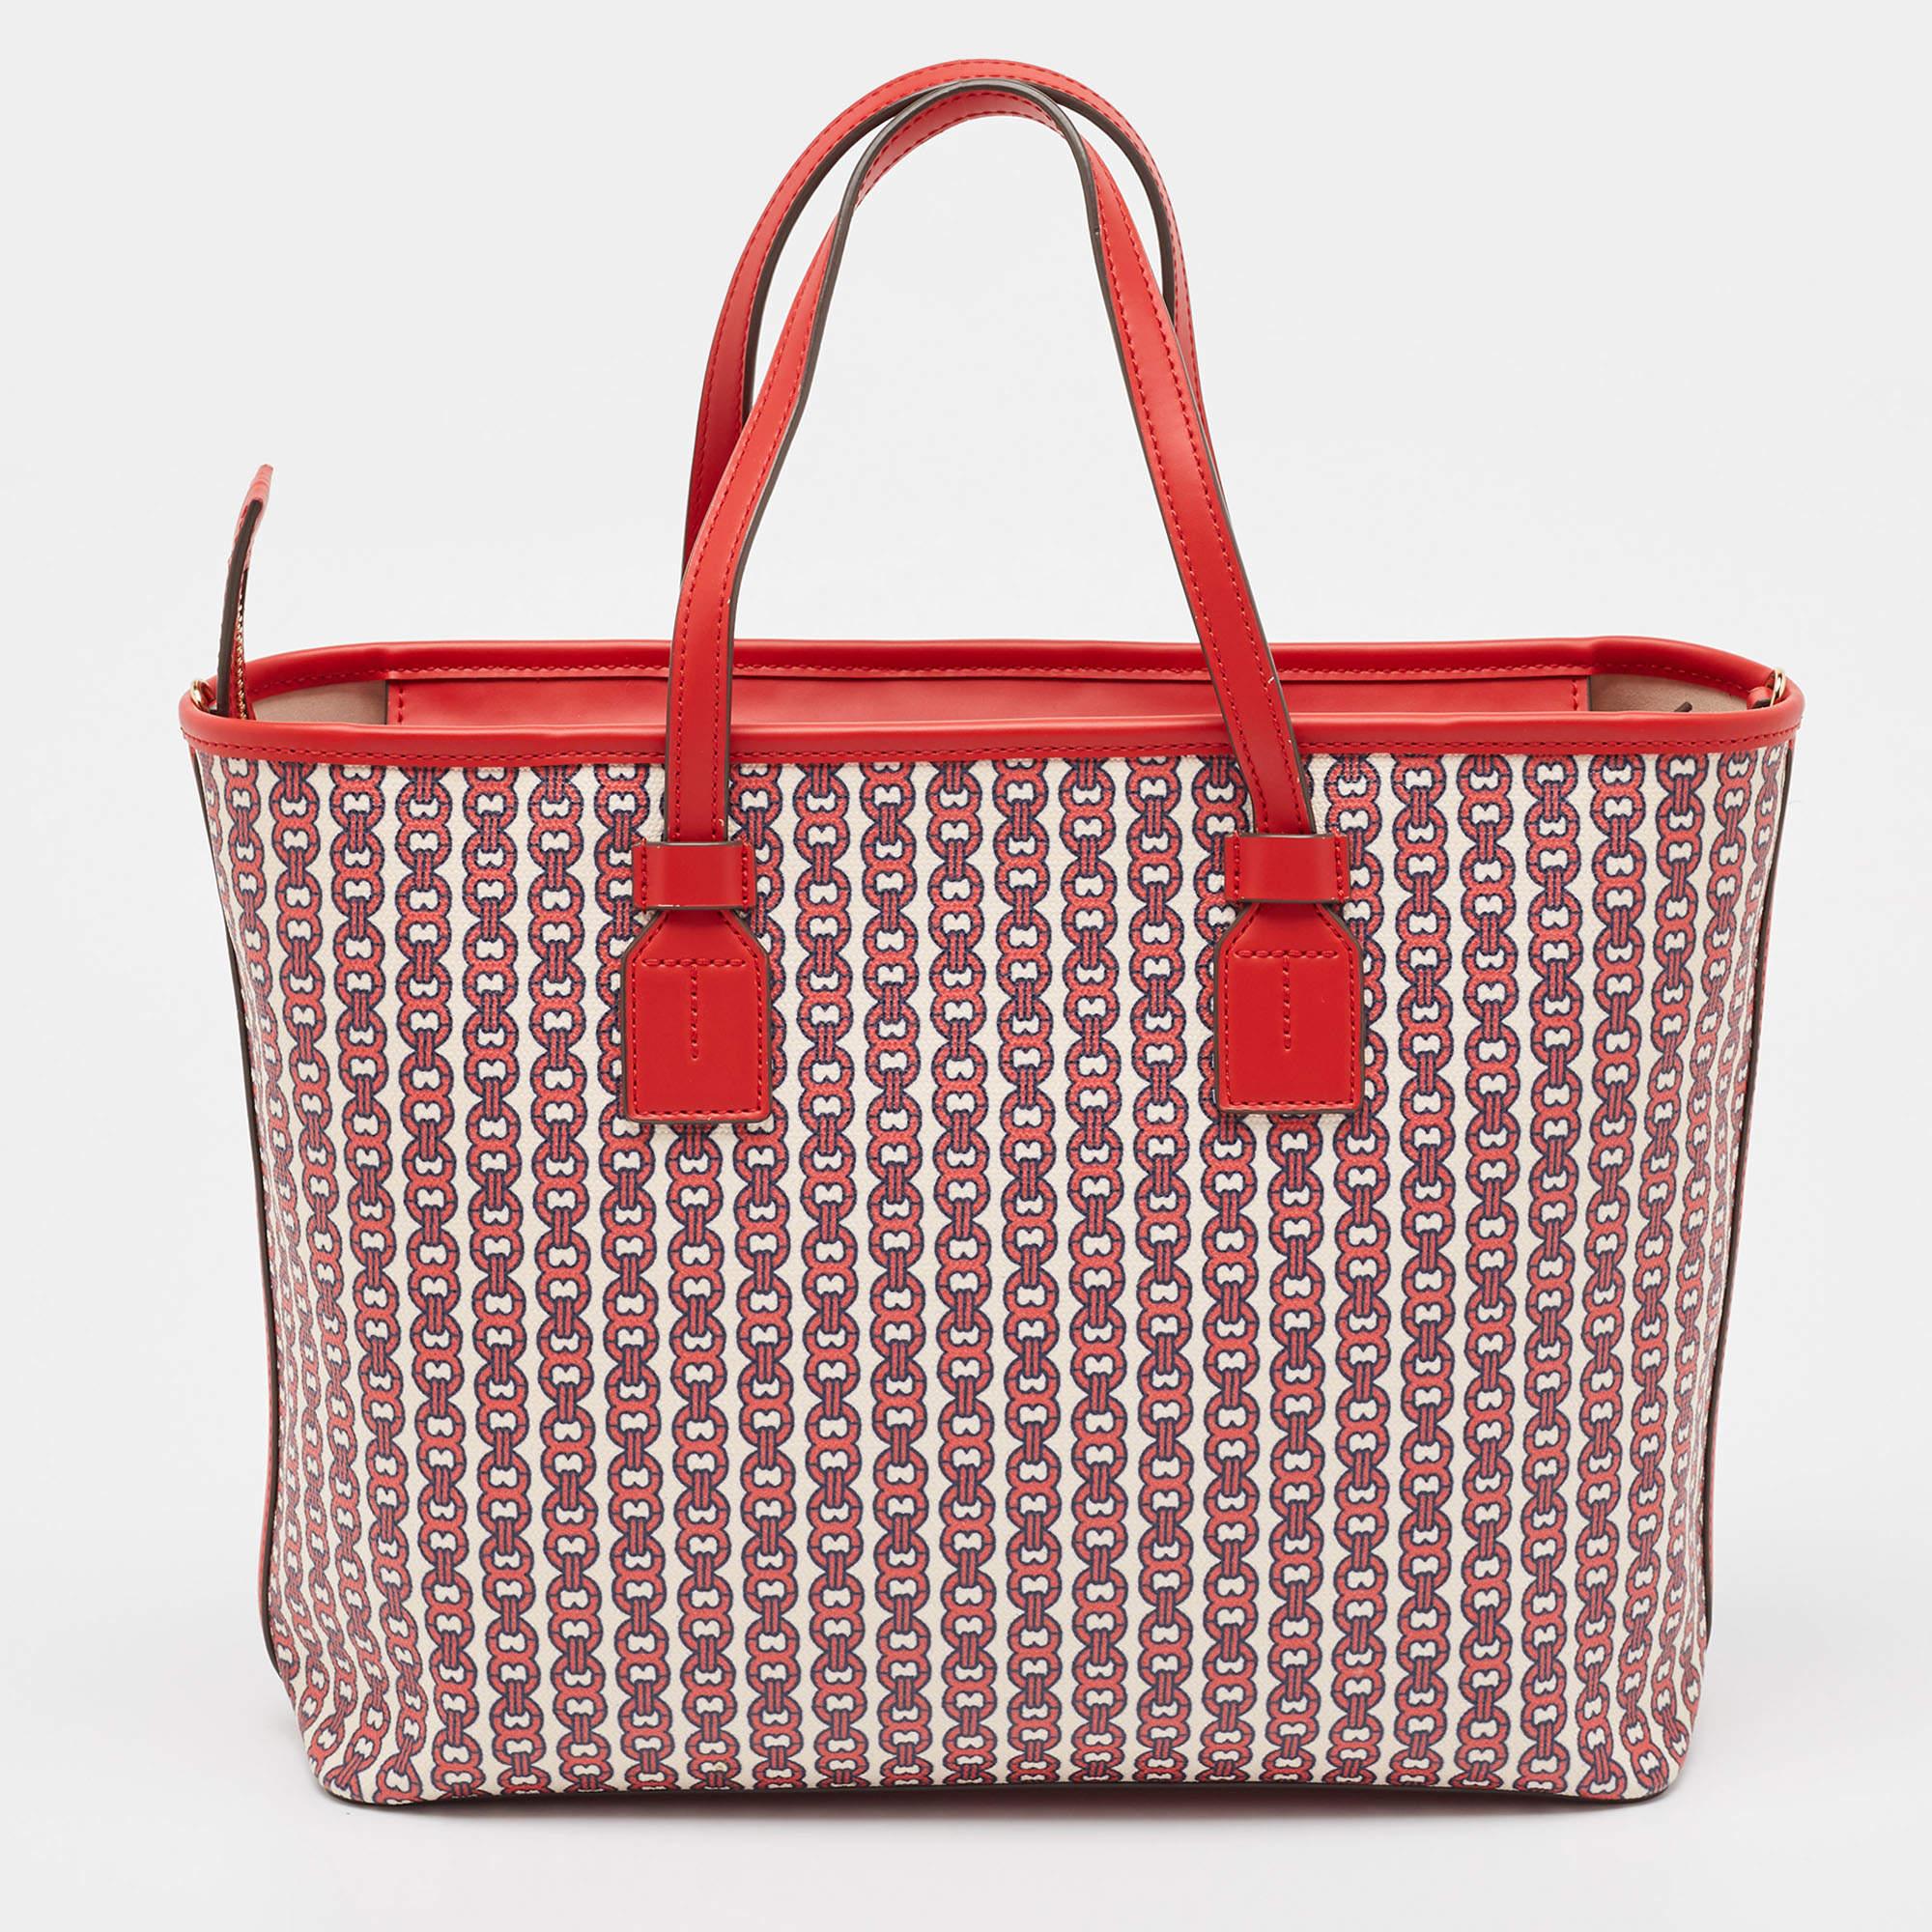 Created from high-quality materials, this tote is enriched with functional and classic elements. It can be carried around conveniently, and its interior is perfectly sized to keep your belongings with ease.

Includes: Detachable Strap